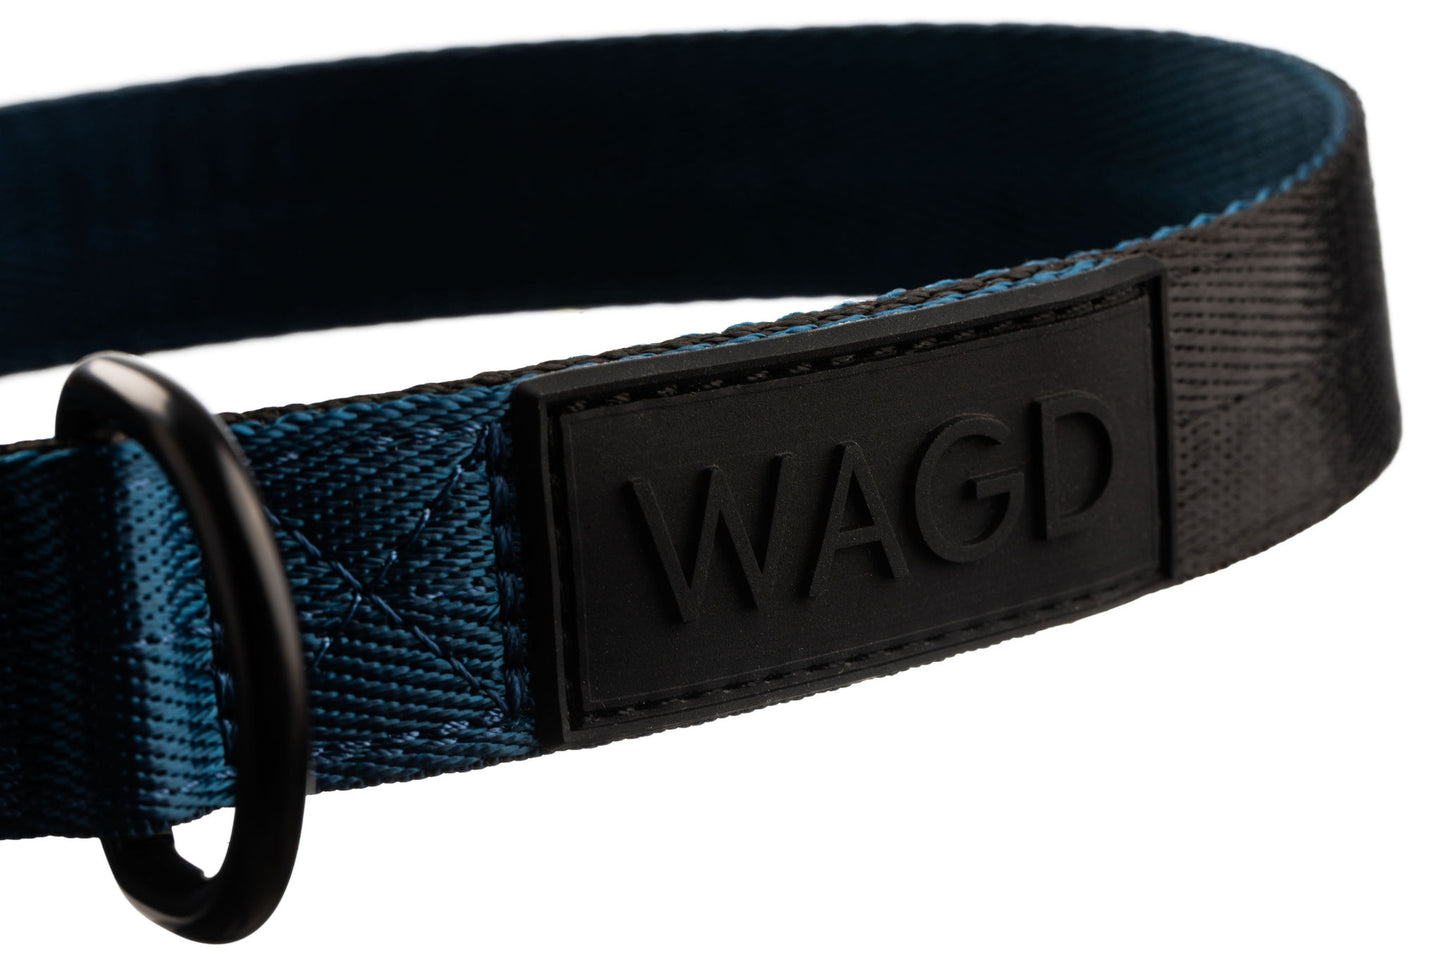 Close up of collar logo. Black rubber with raised black letter WAGD.